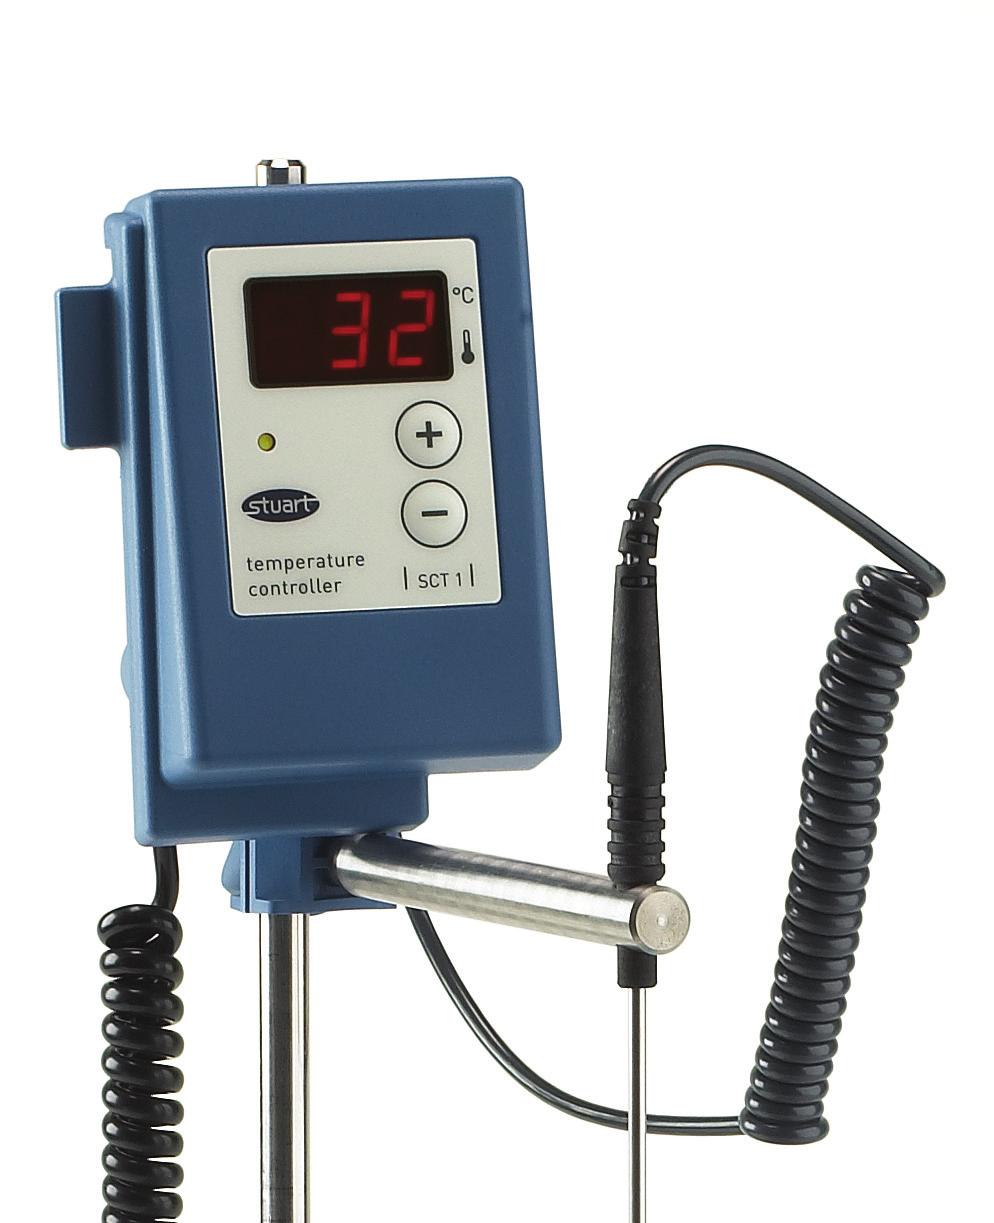 Designed for use with the Stuart range of Undergrad hotplates and hotplate stirrers, the can be used either as a precise controller of temperature up to a maximum of 200 C or as a digital thermometer